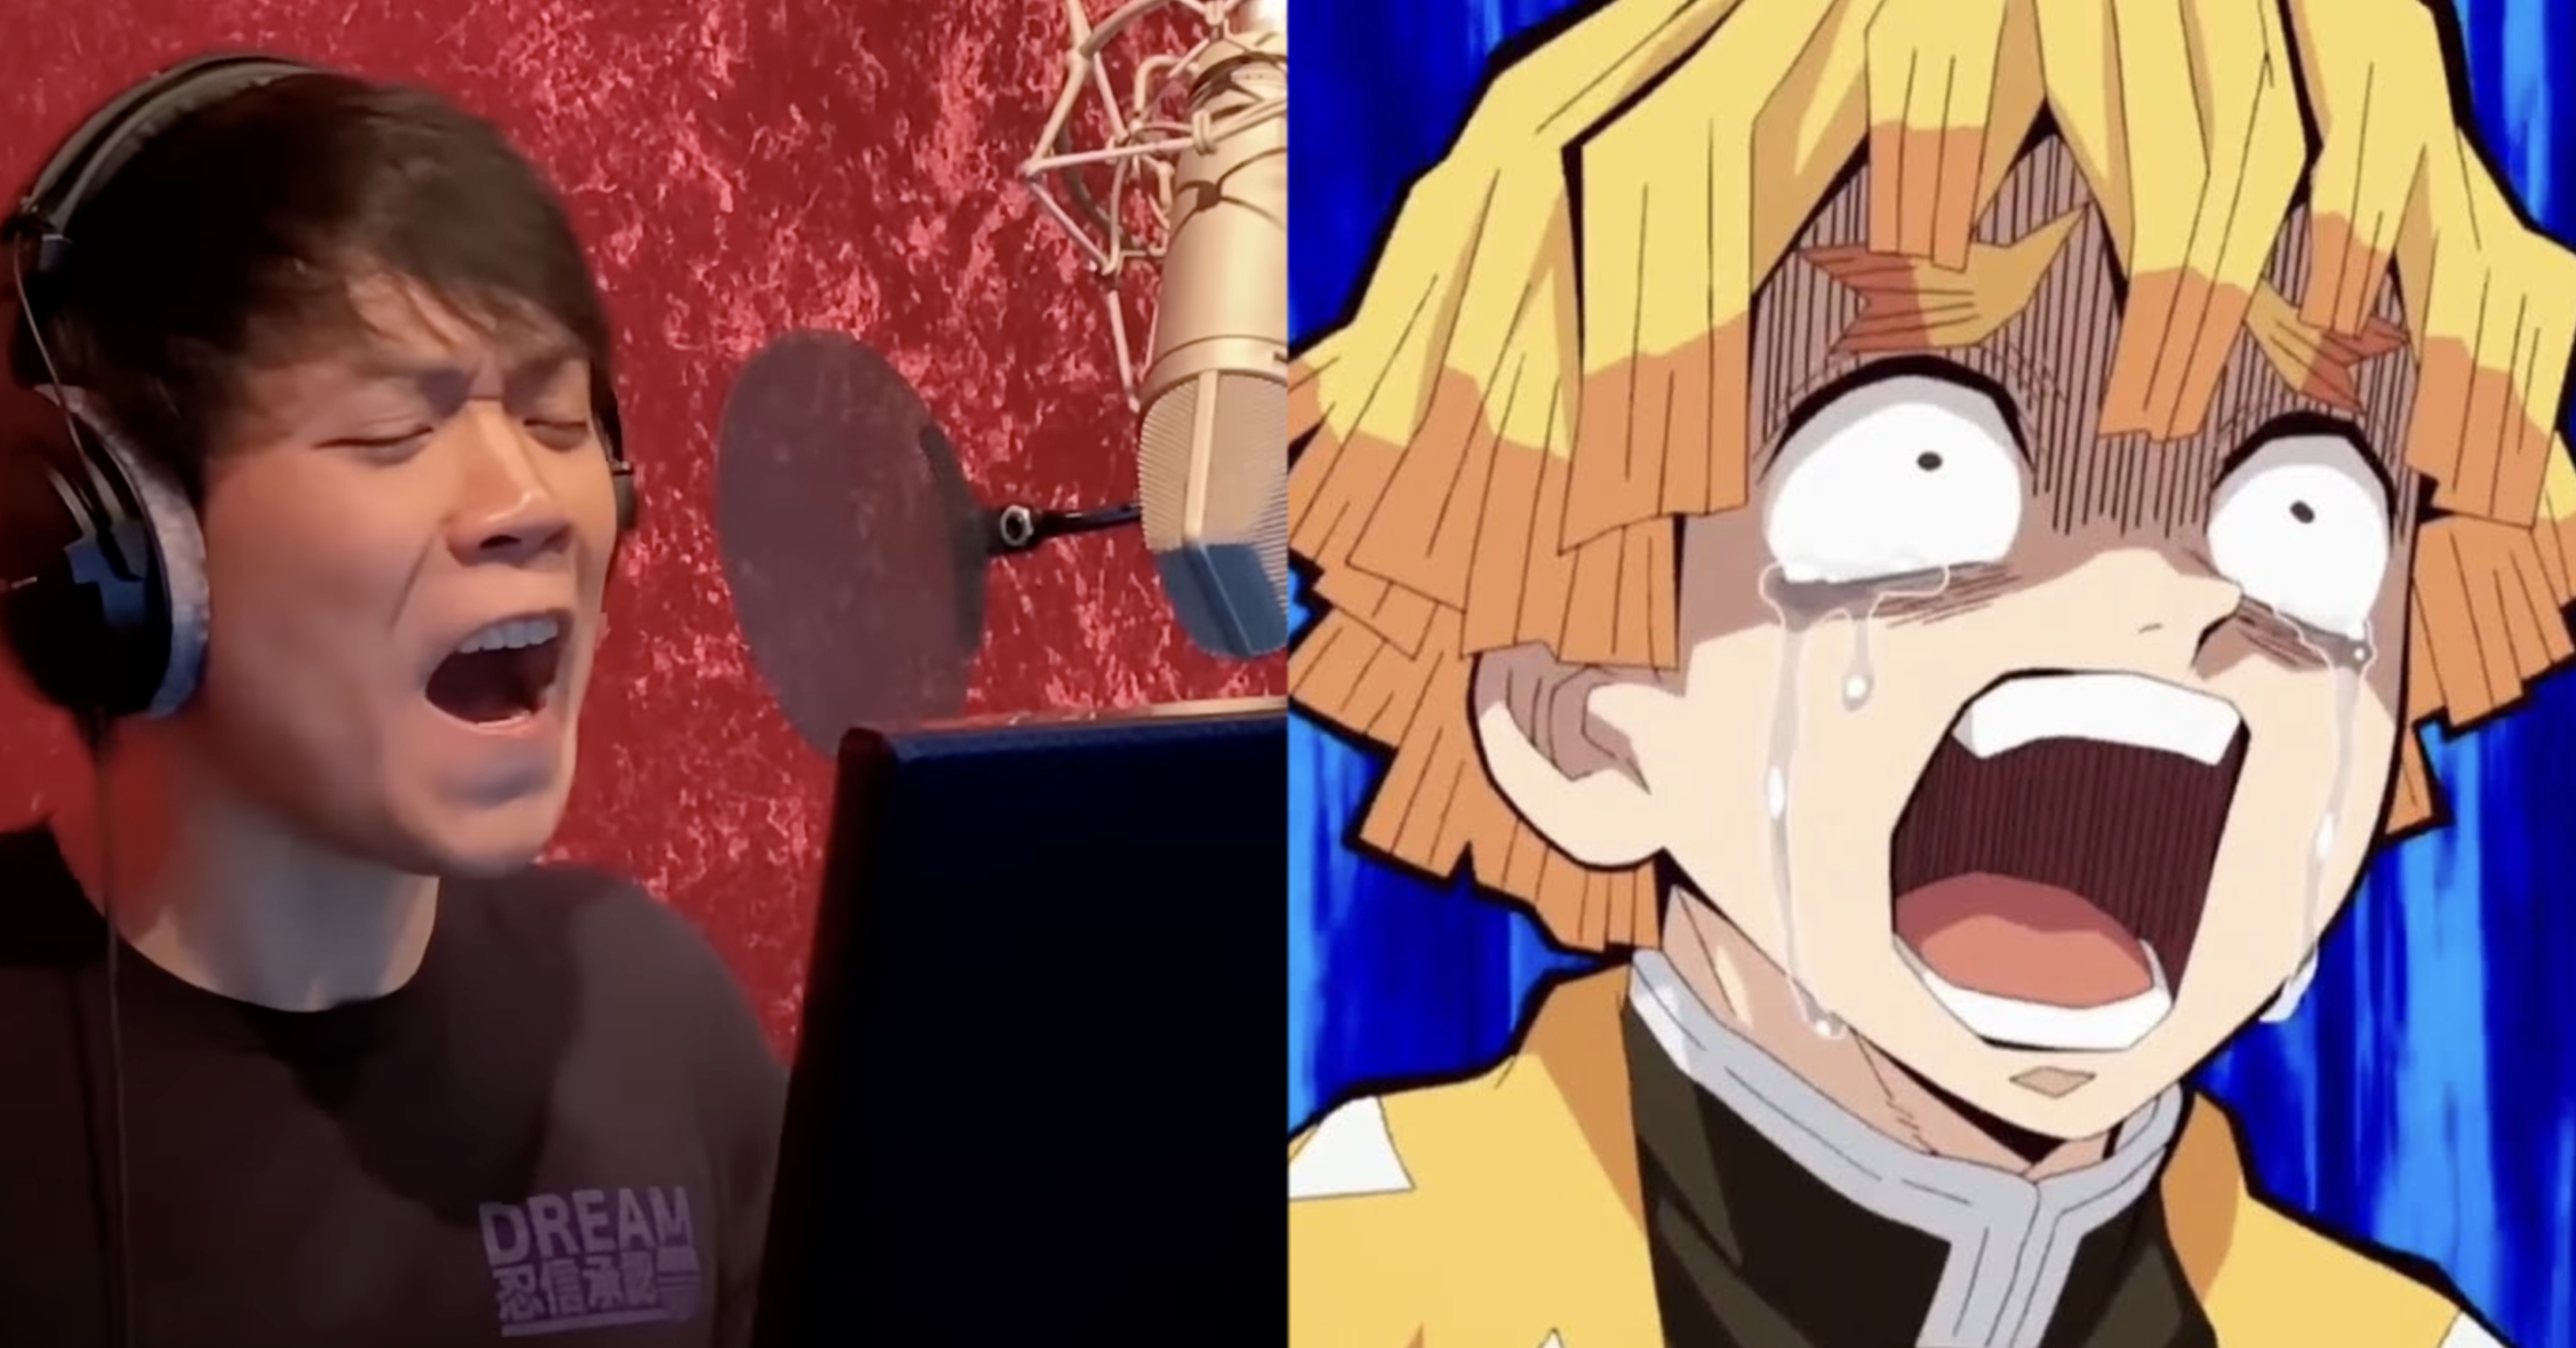 Left: Aleks recording dialogue for Zenitsu in a voice recording booth; Right: A close up of Zenitsu screaming